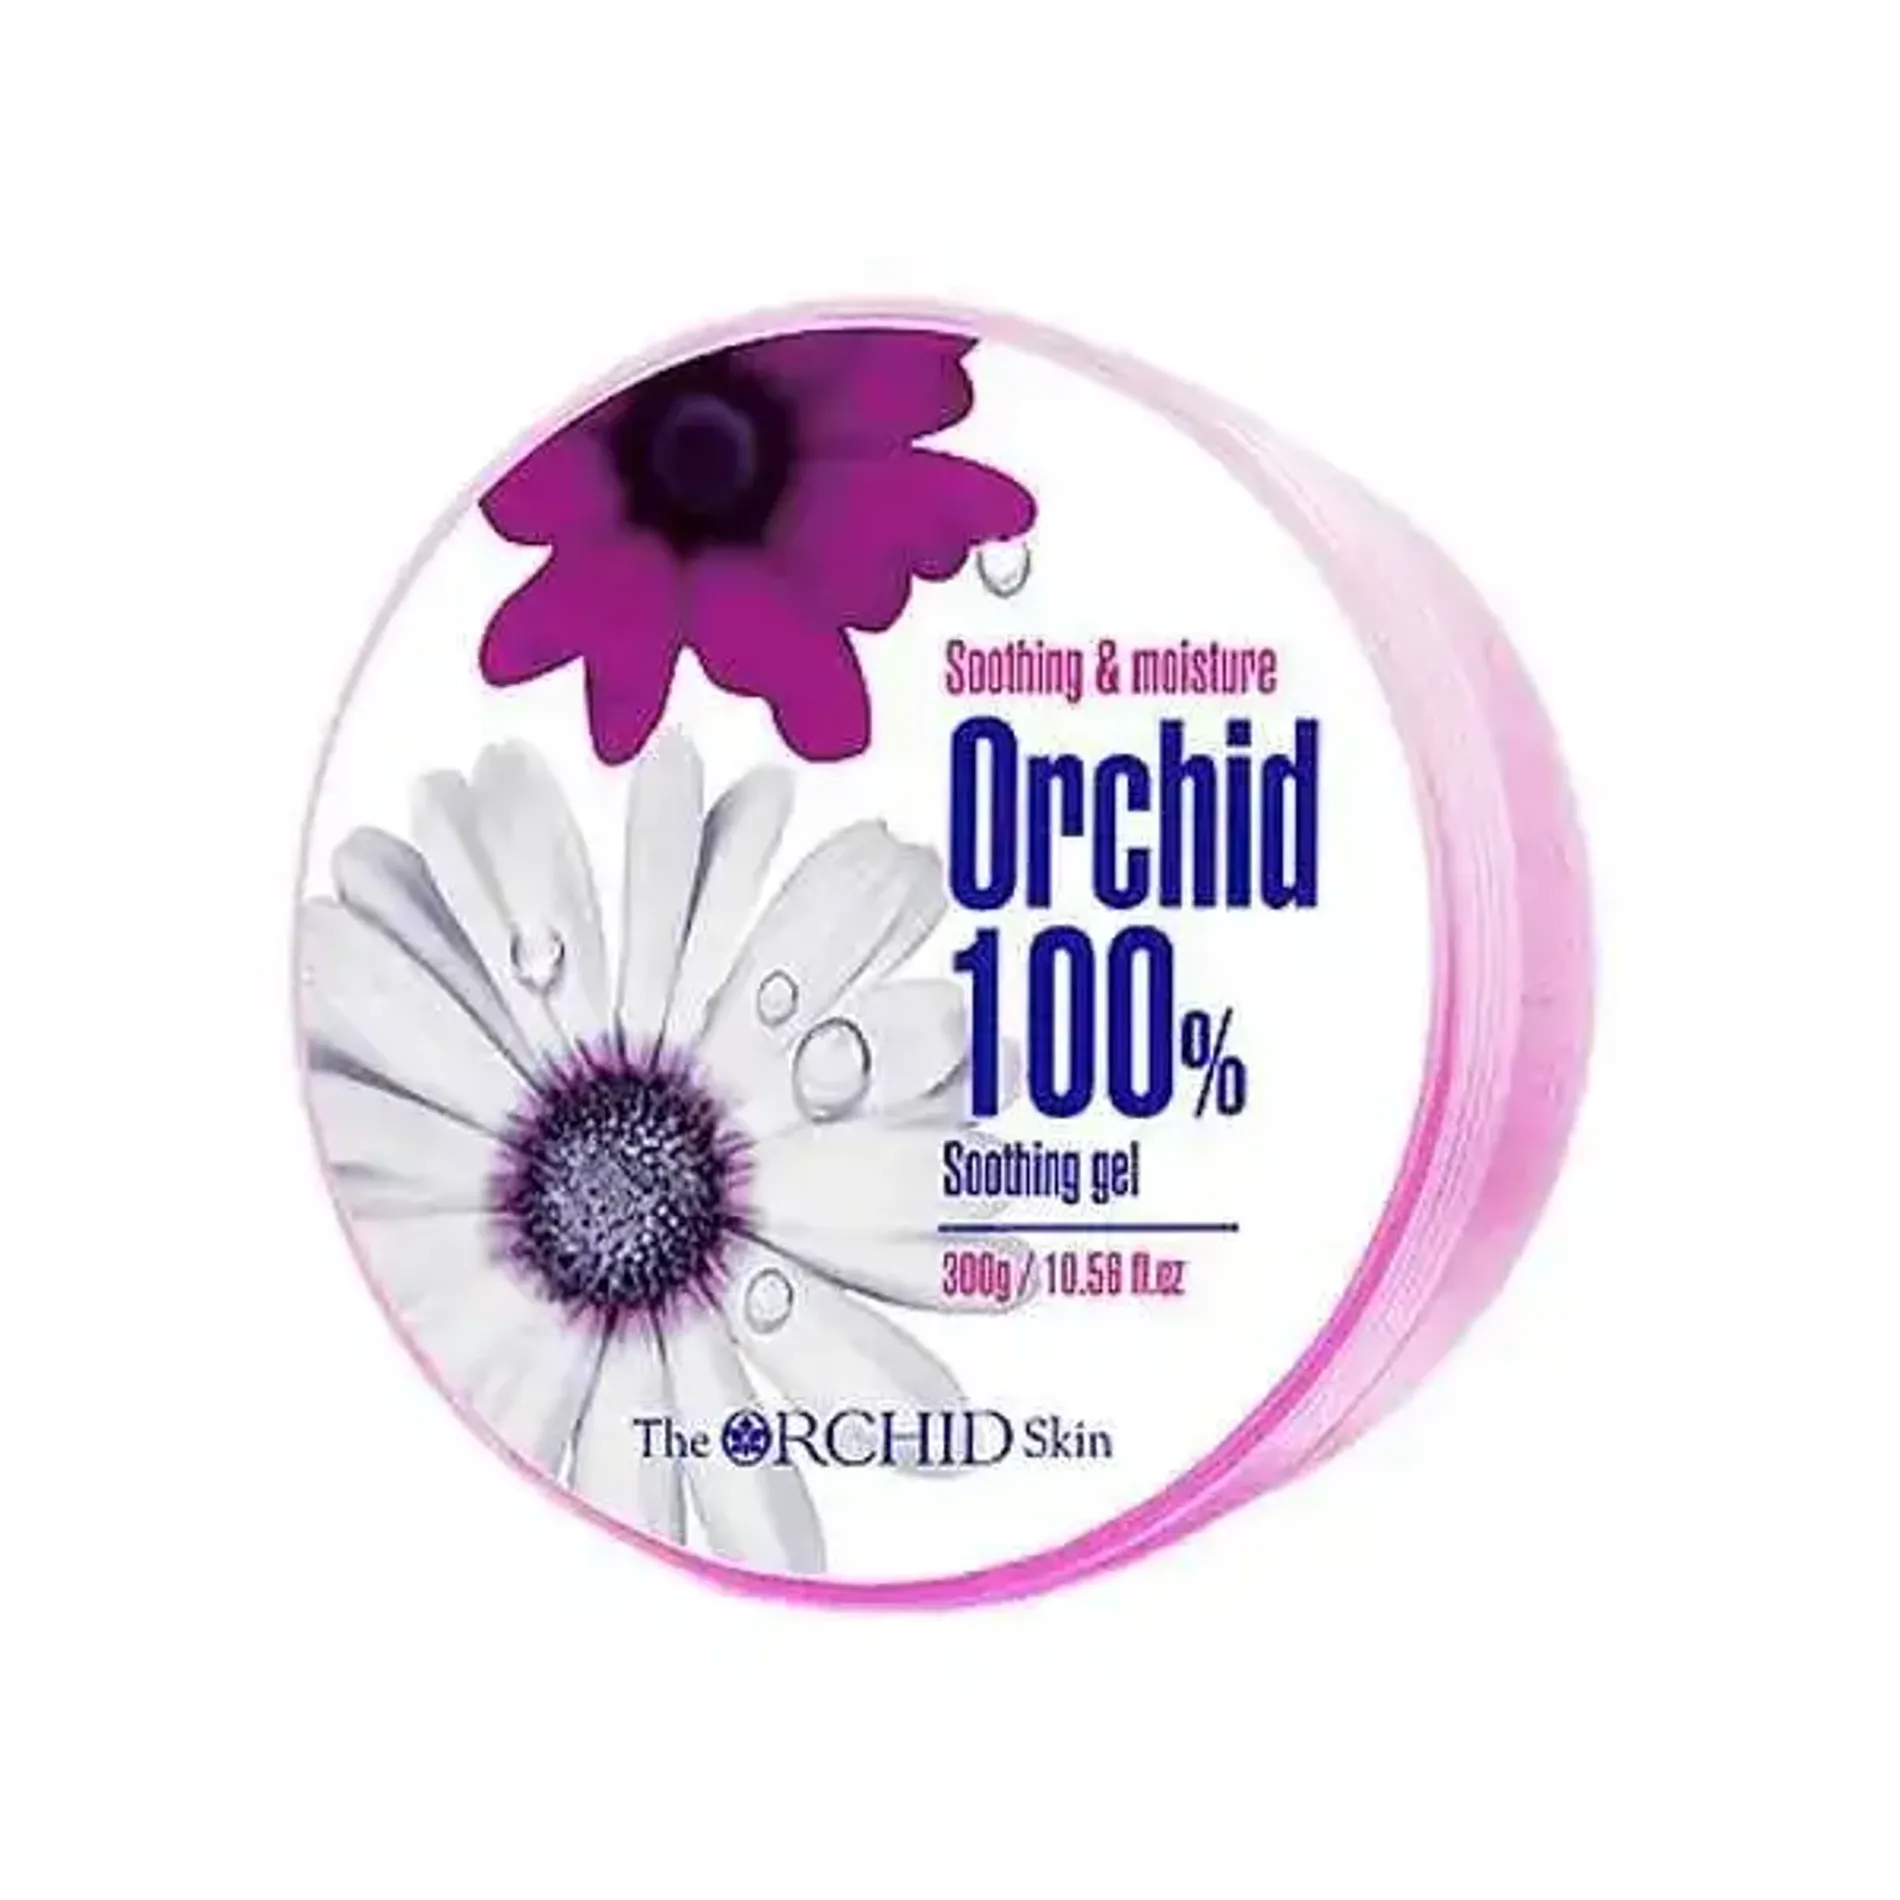 san-pham-duong-the-the-orchid-skin-orchid-soothing-gel-1